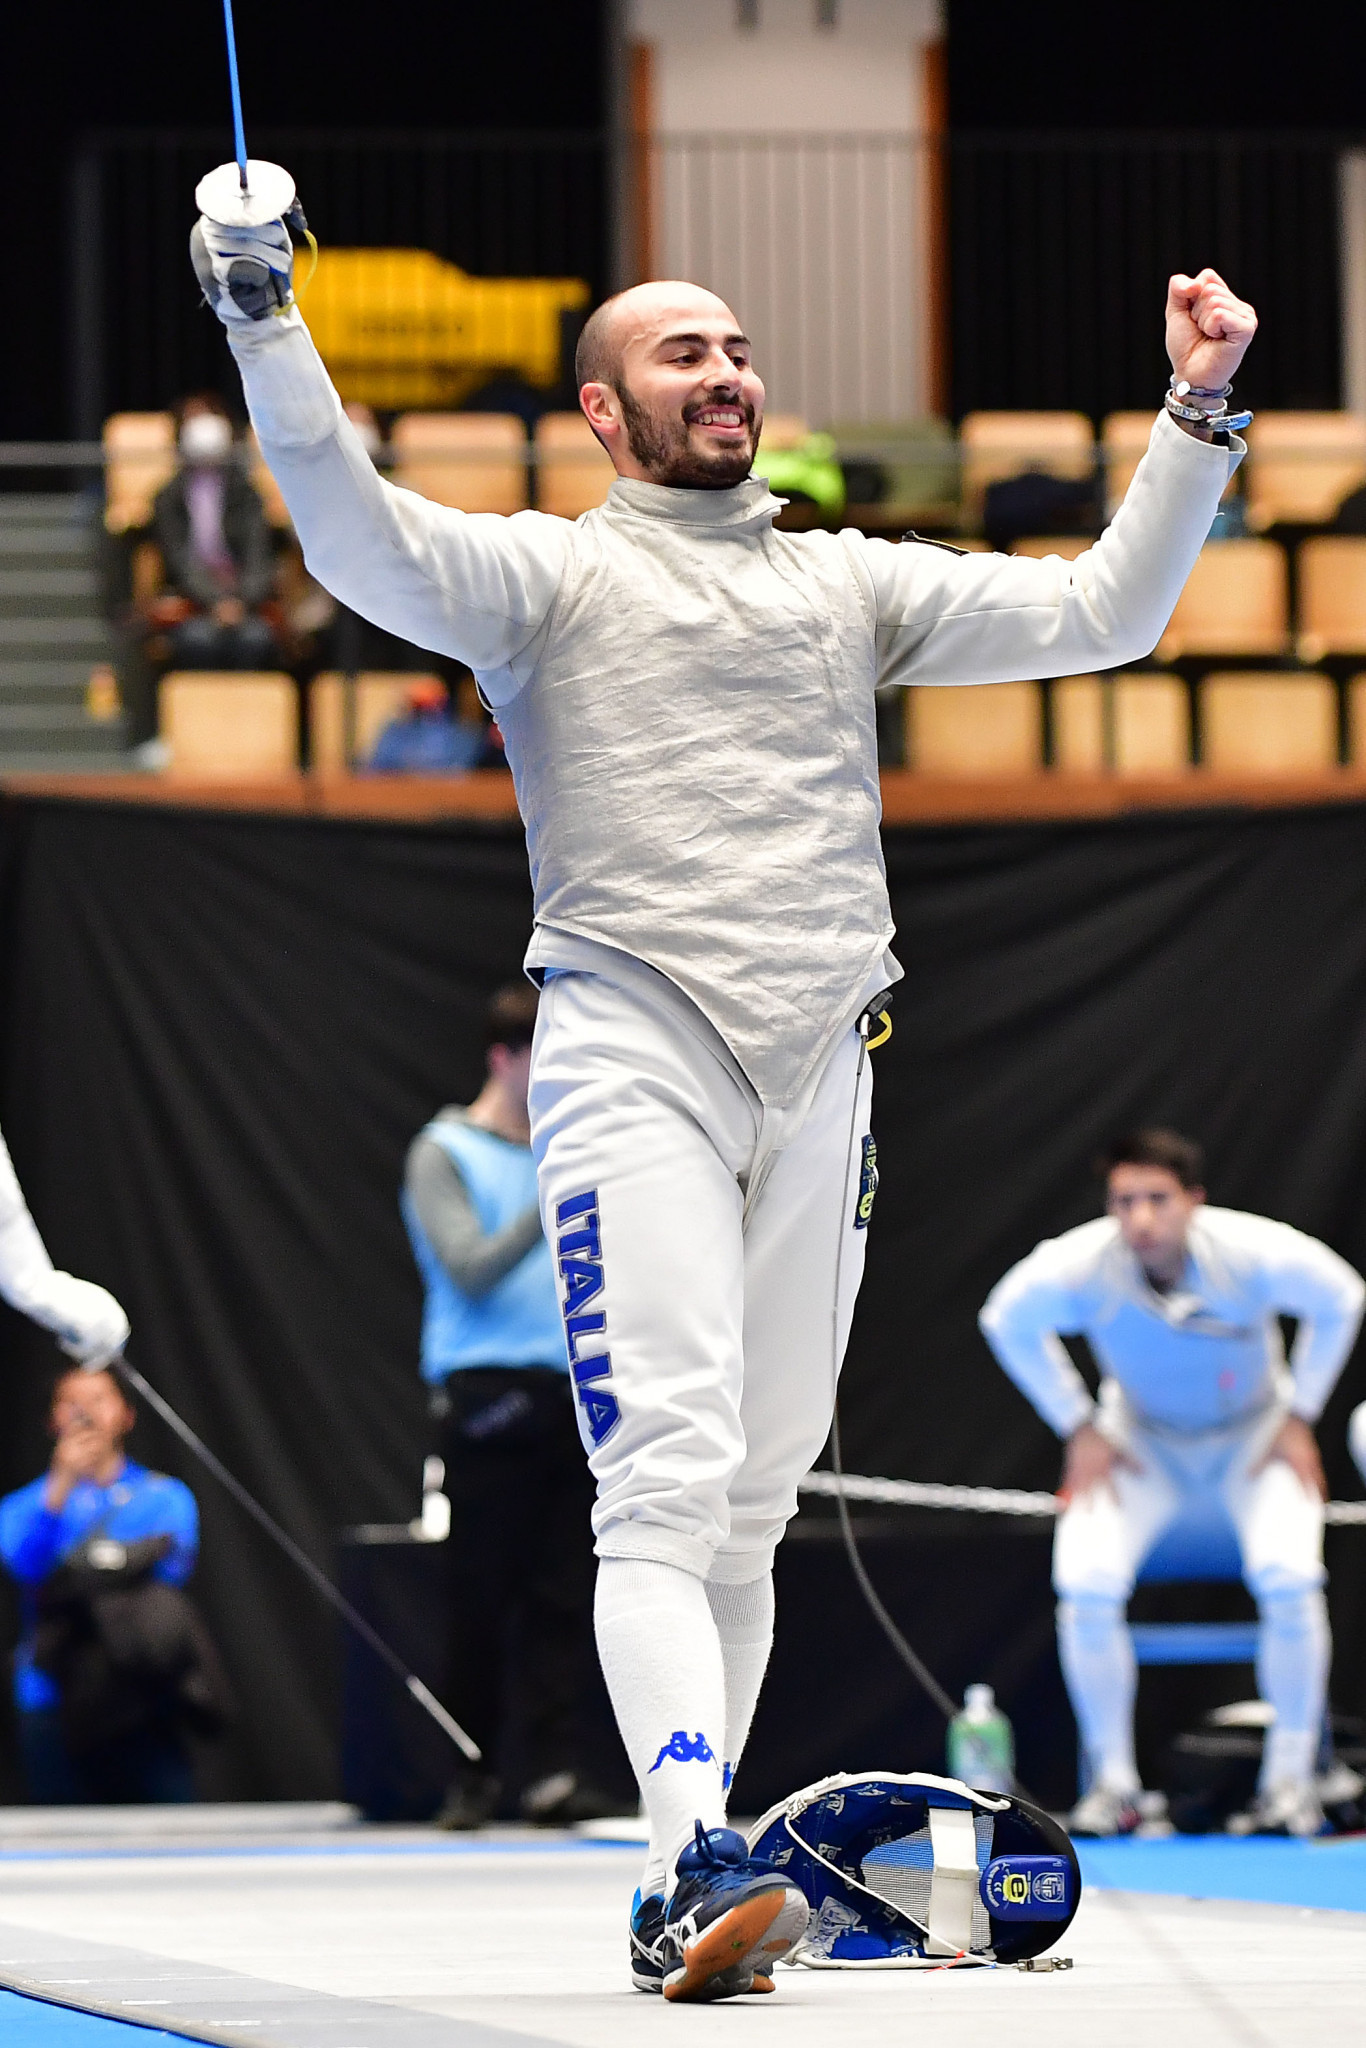 Italy's Foconi enters home FIE Grand Prix as world number one